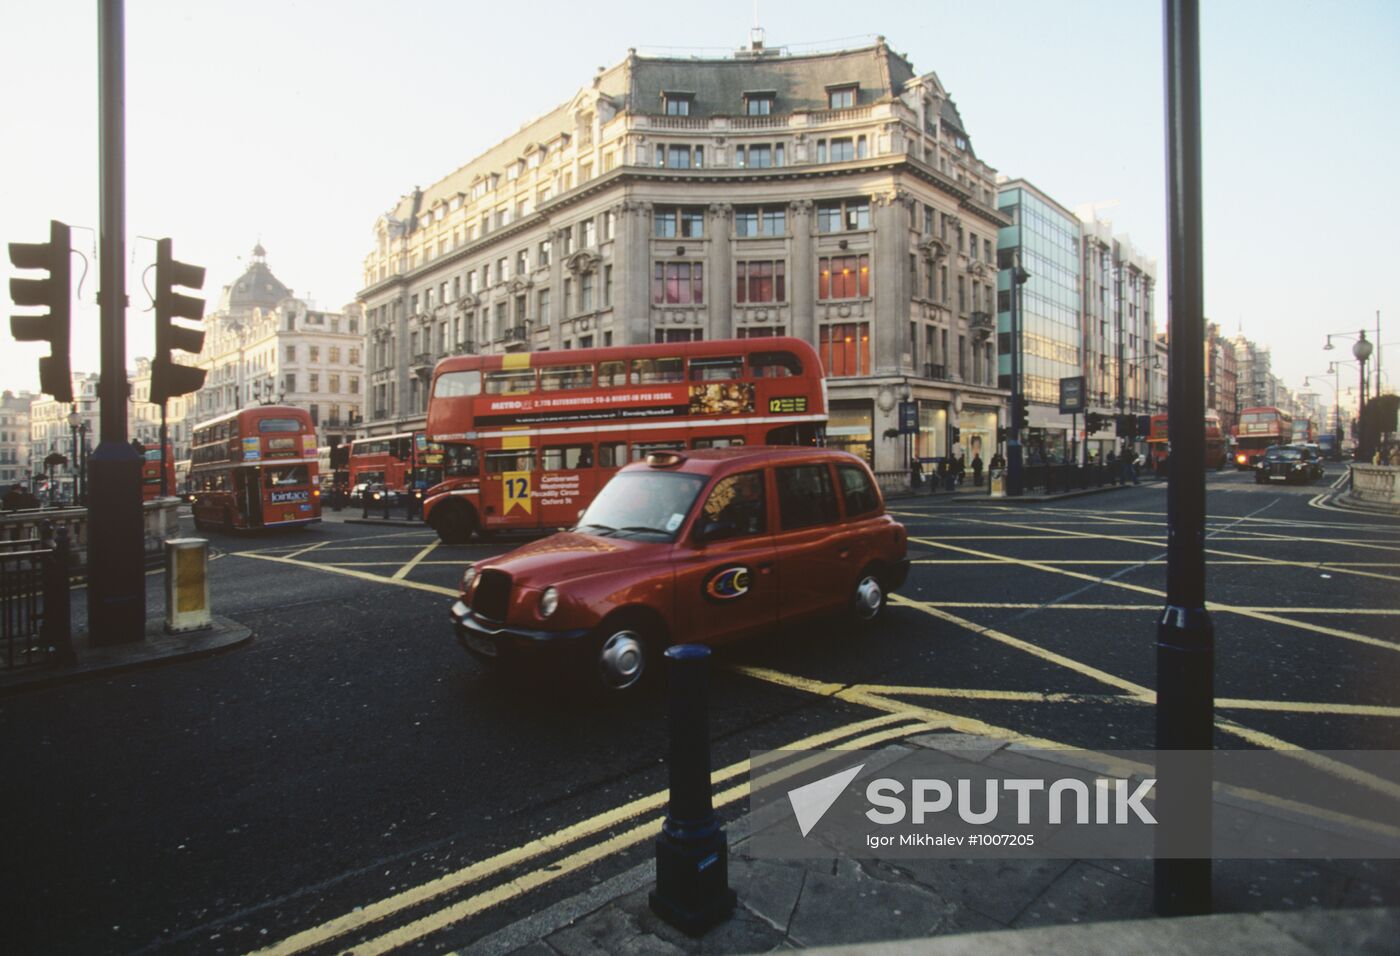 Intersection in London